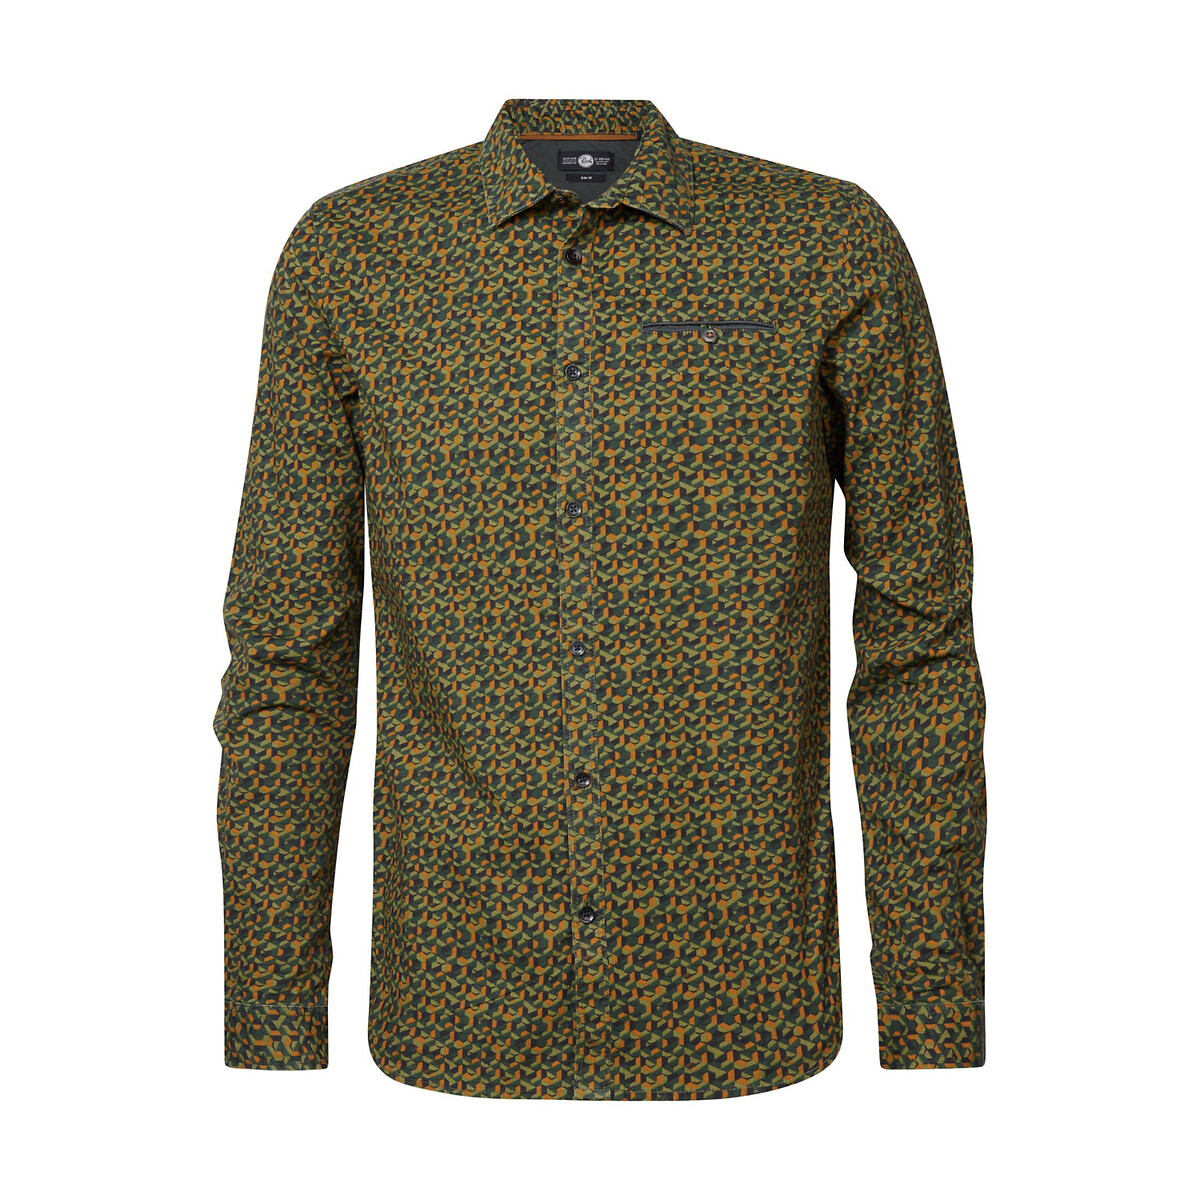 Printed Cotton Shirt with Long Sleeves